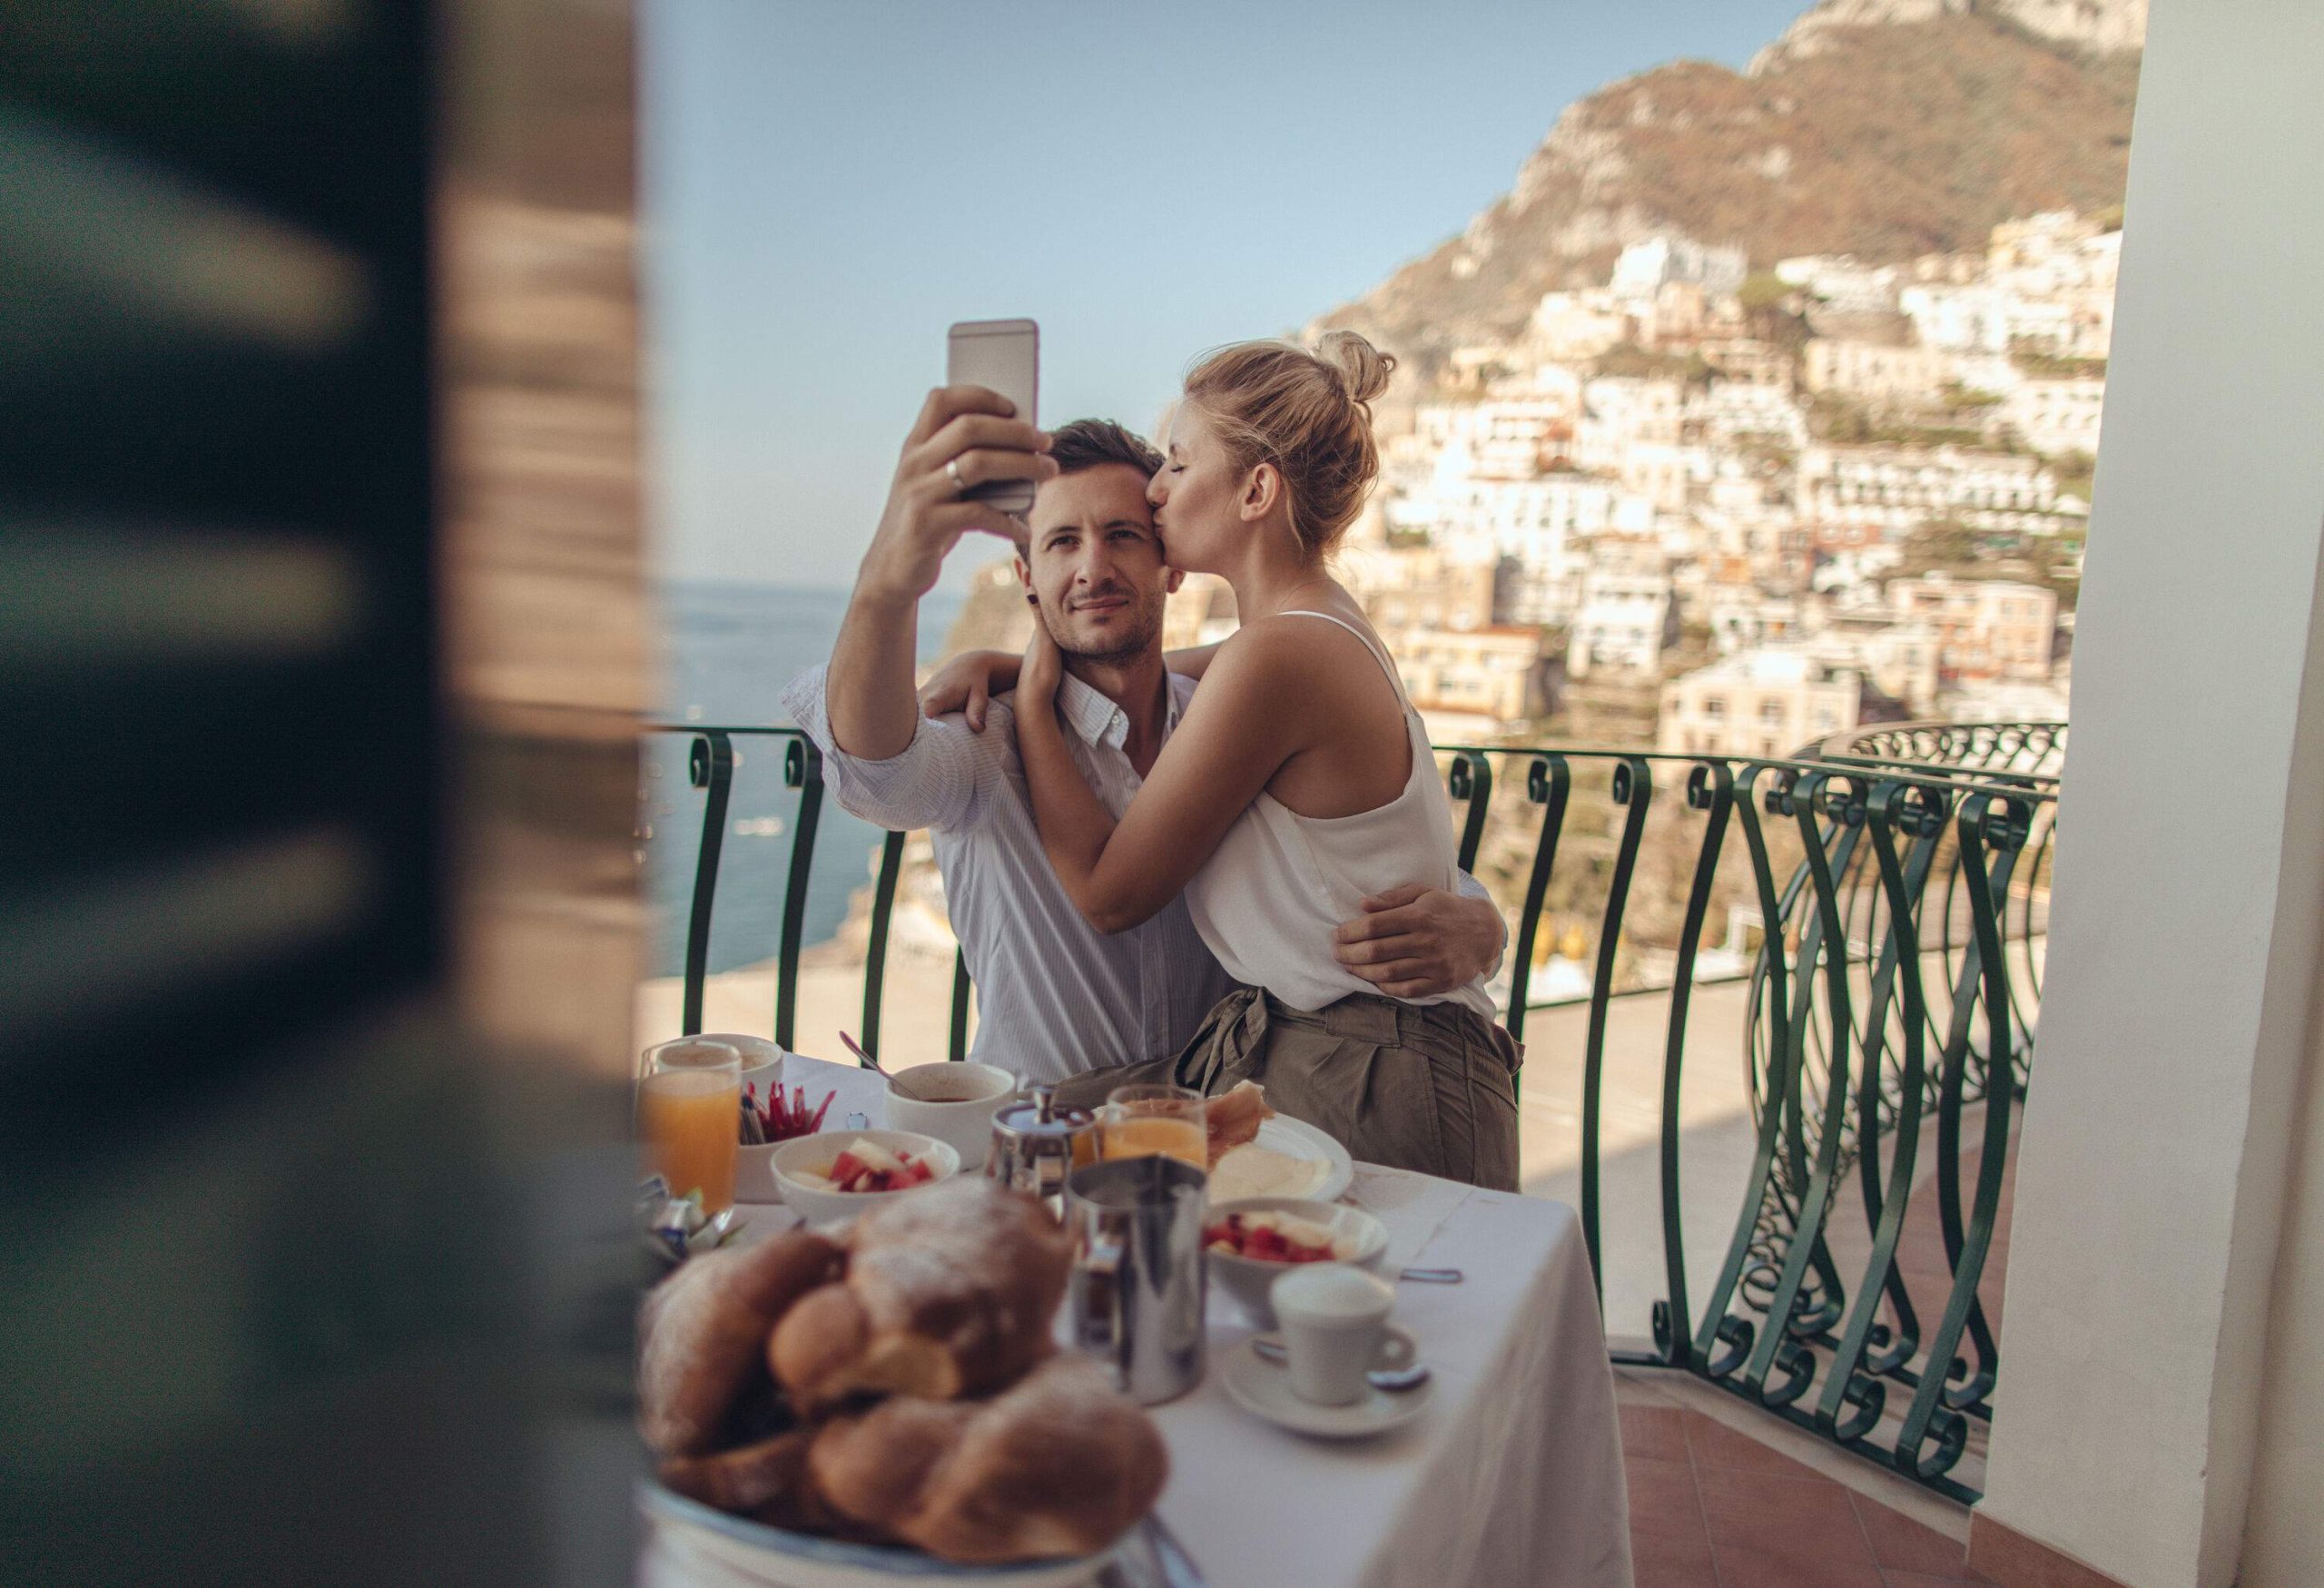 A couple with their breakfast on the balcony and taking a selfie.